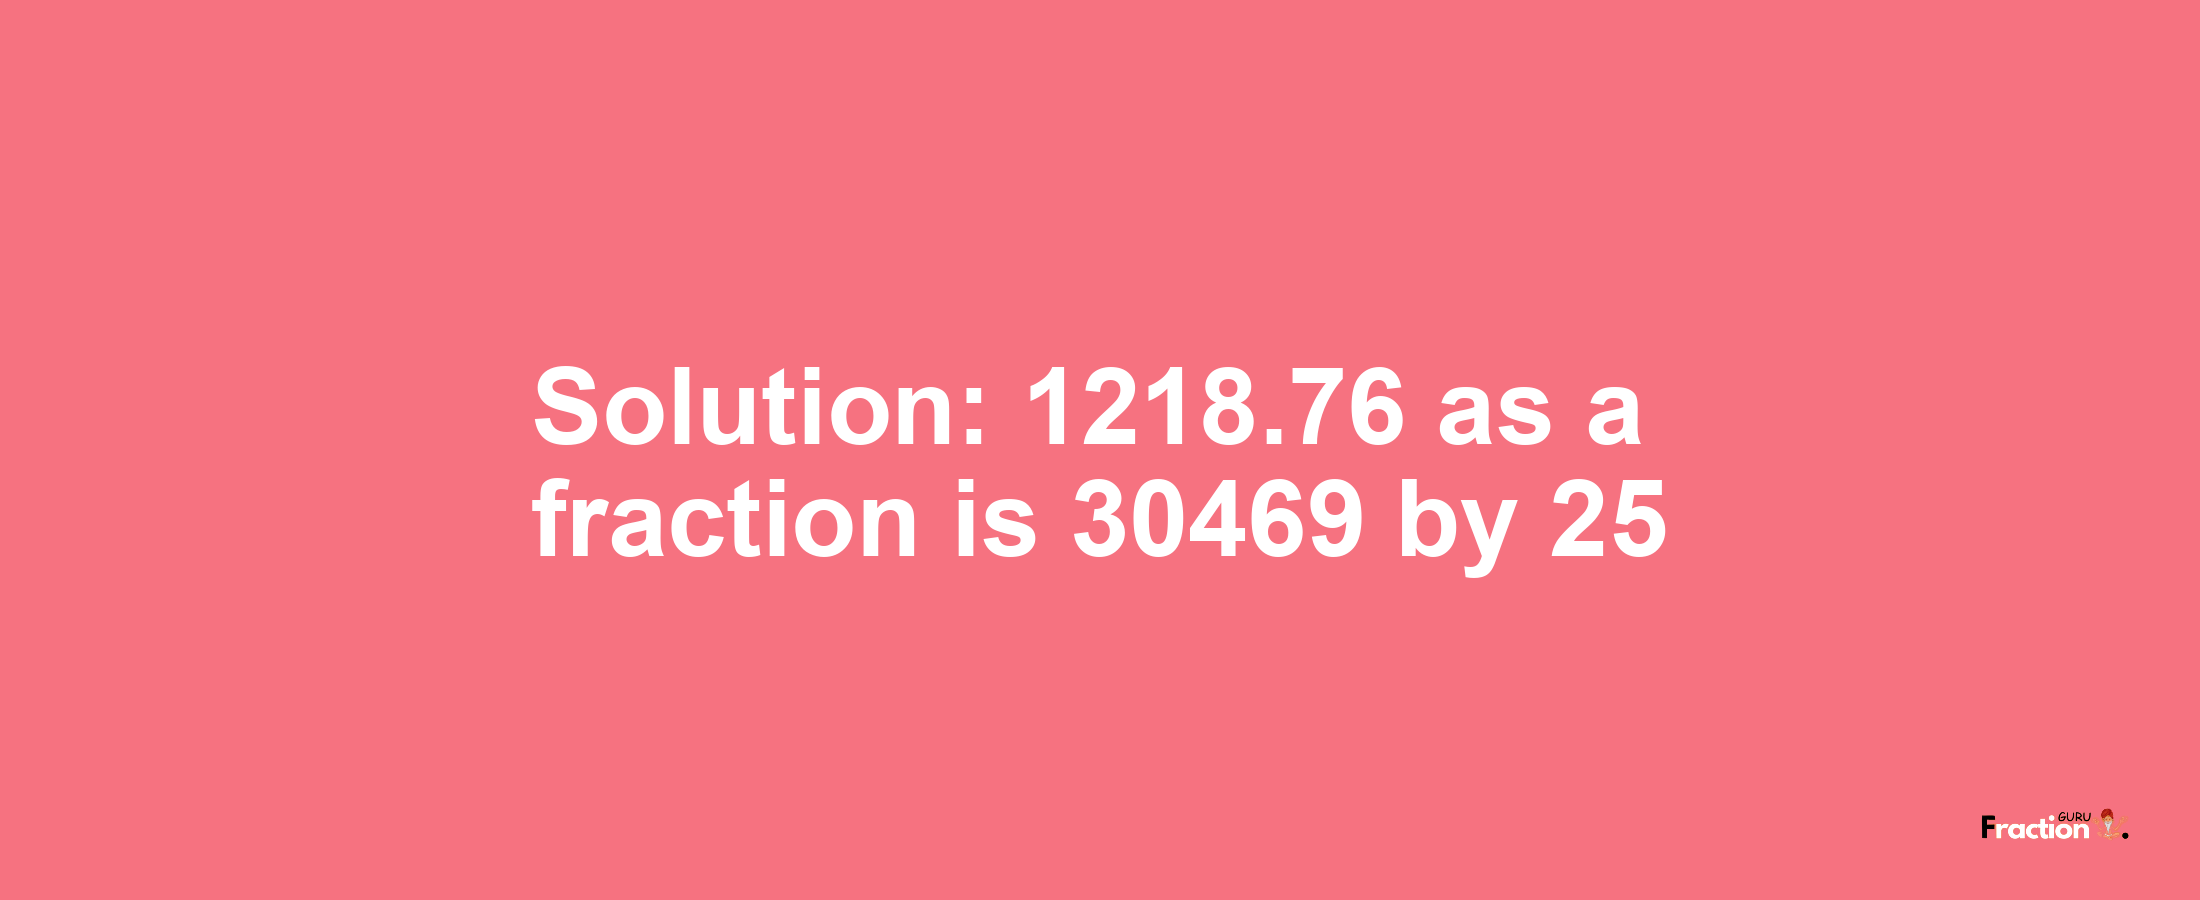 Solution:1218.76 as a fraction is 30469/25